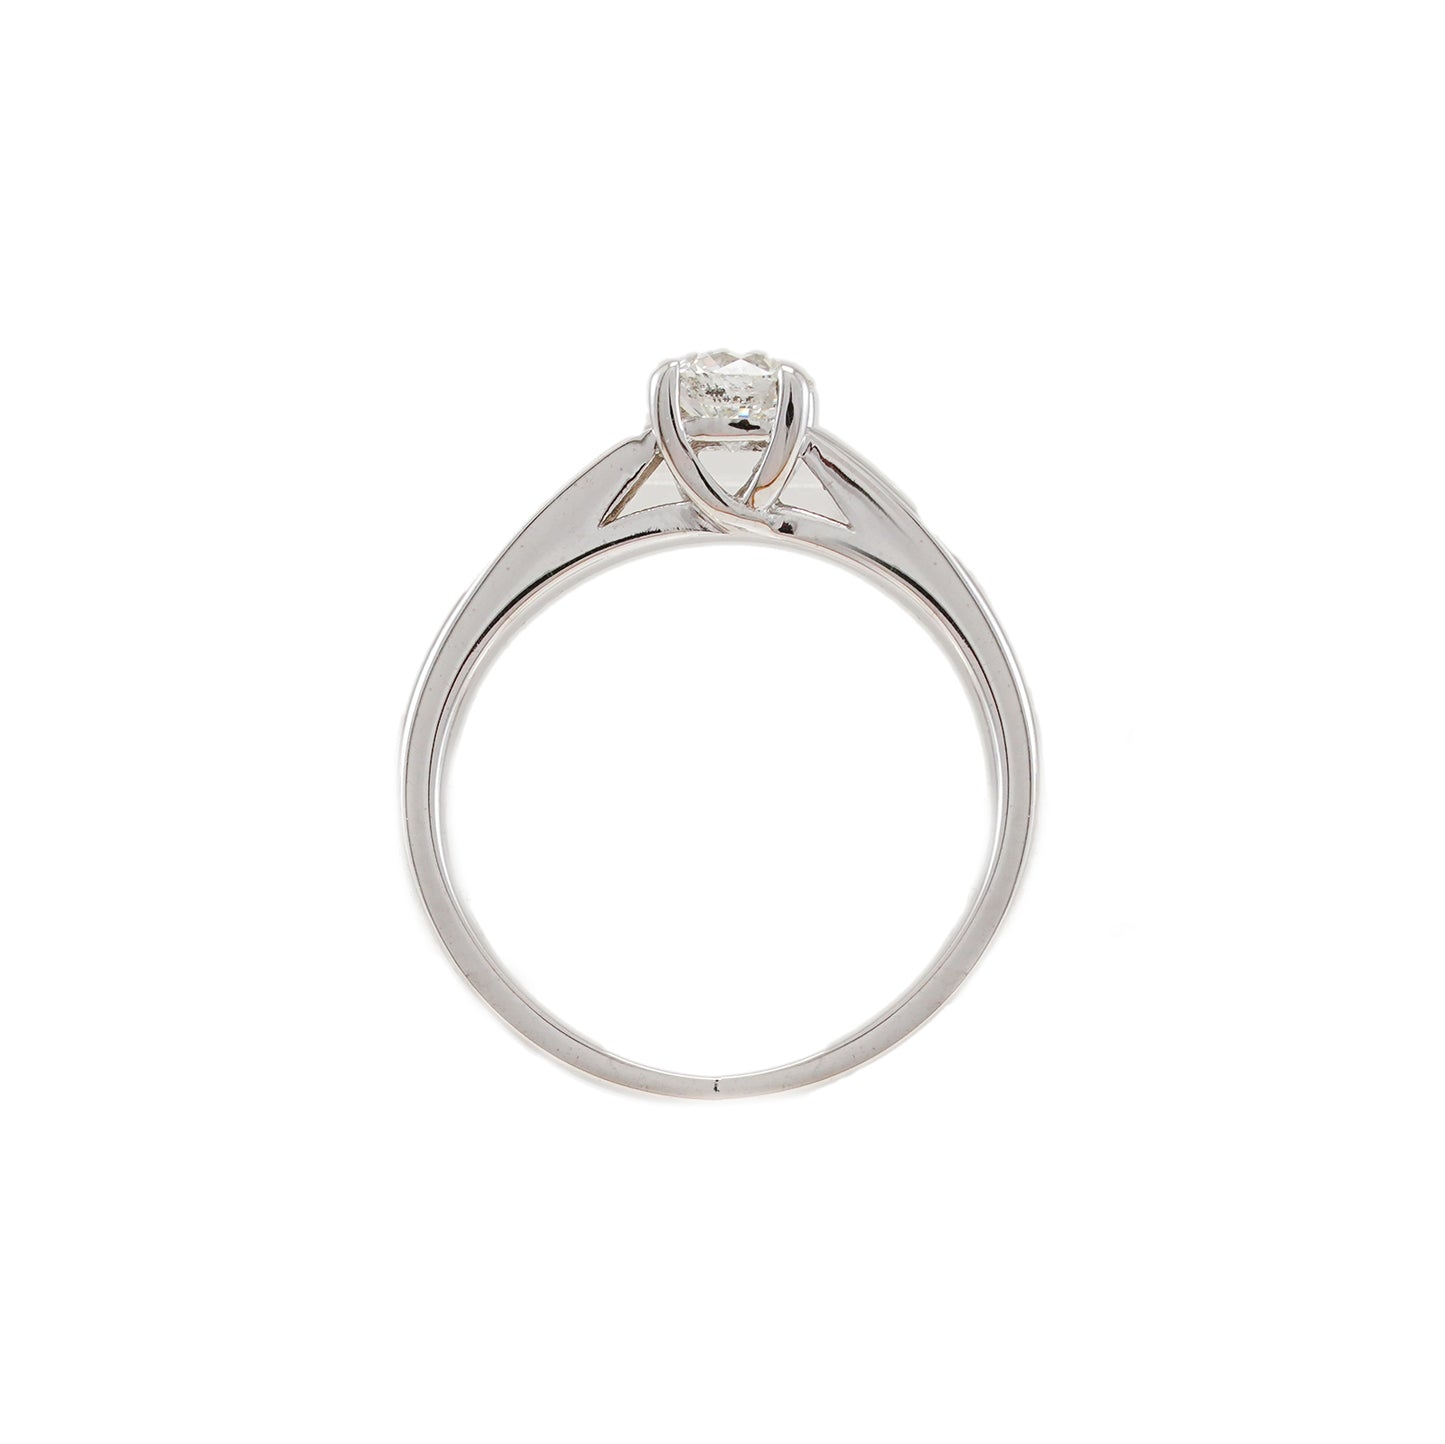 Solitaire engagement ring diamond white gold 14K women's jewelry women's ring diamond ring